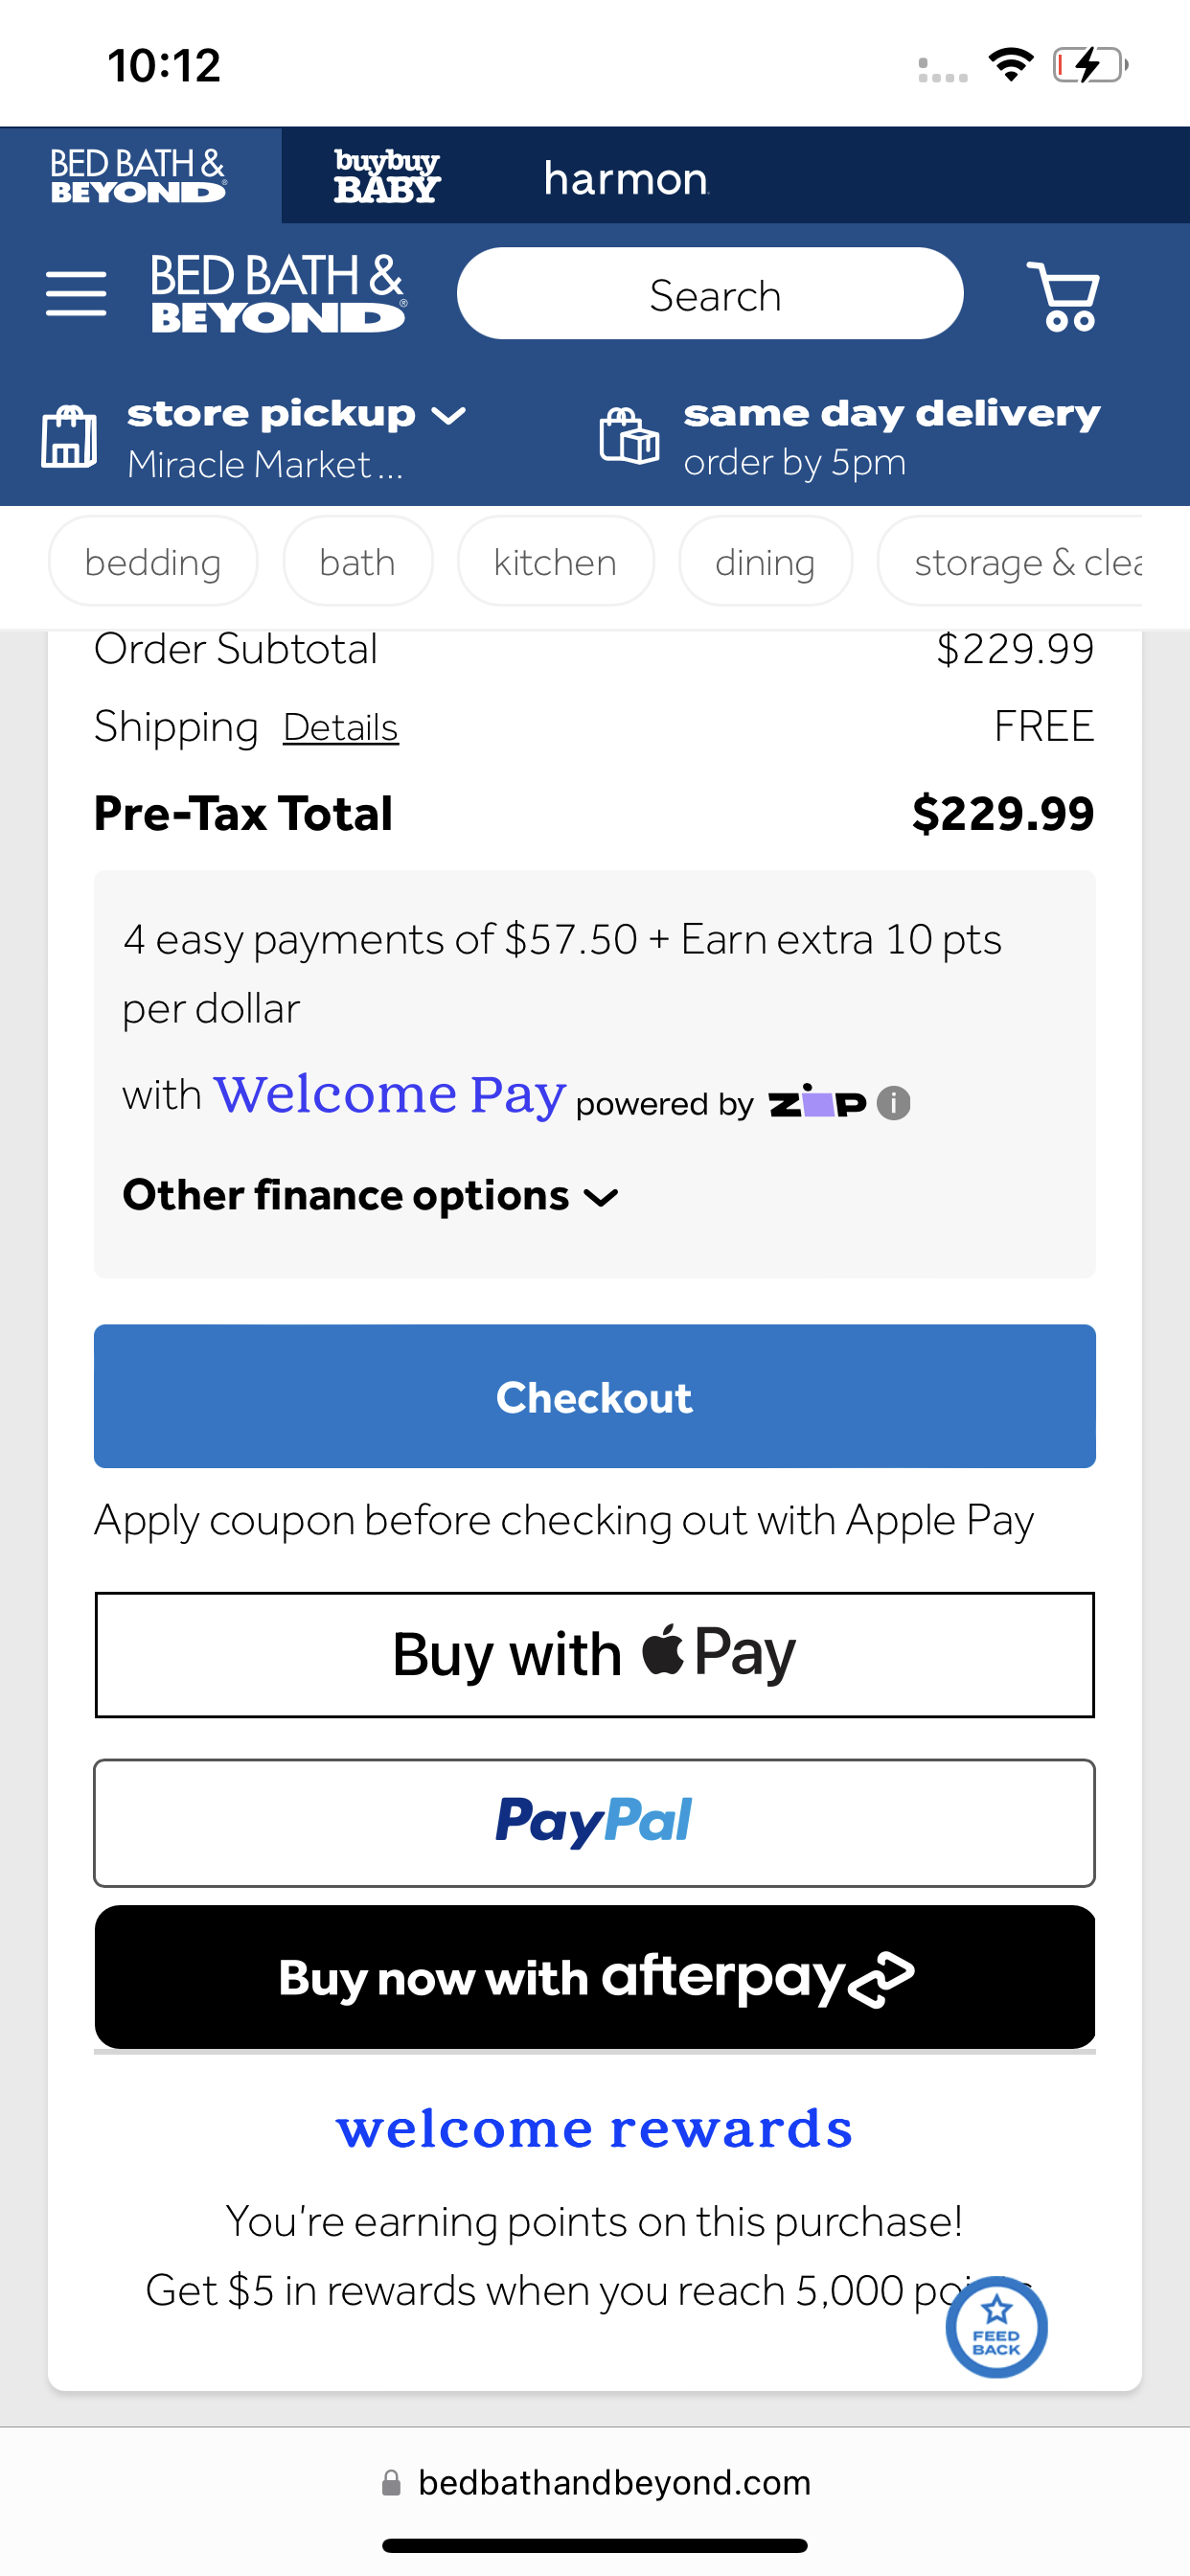 Bed Bath & Beyond accepts Apple Pay on its website.